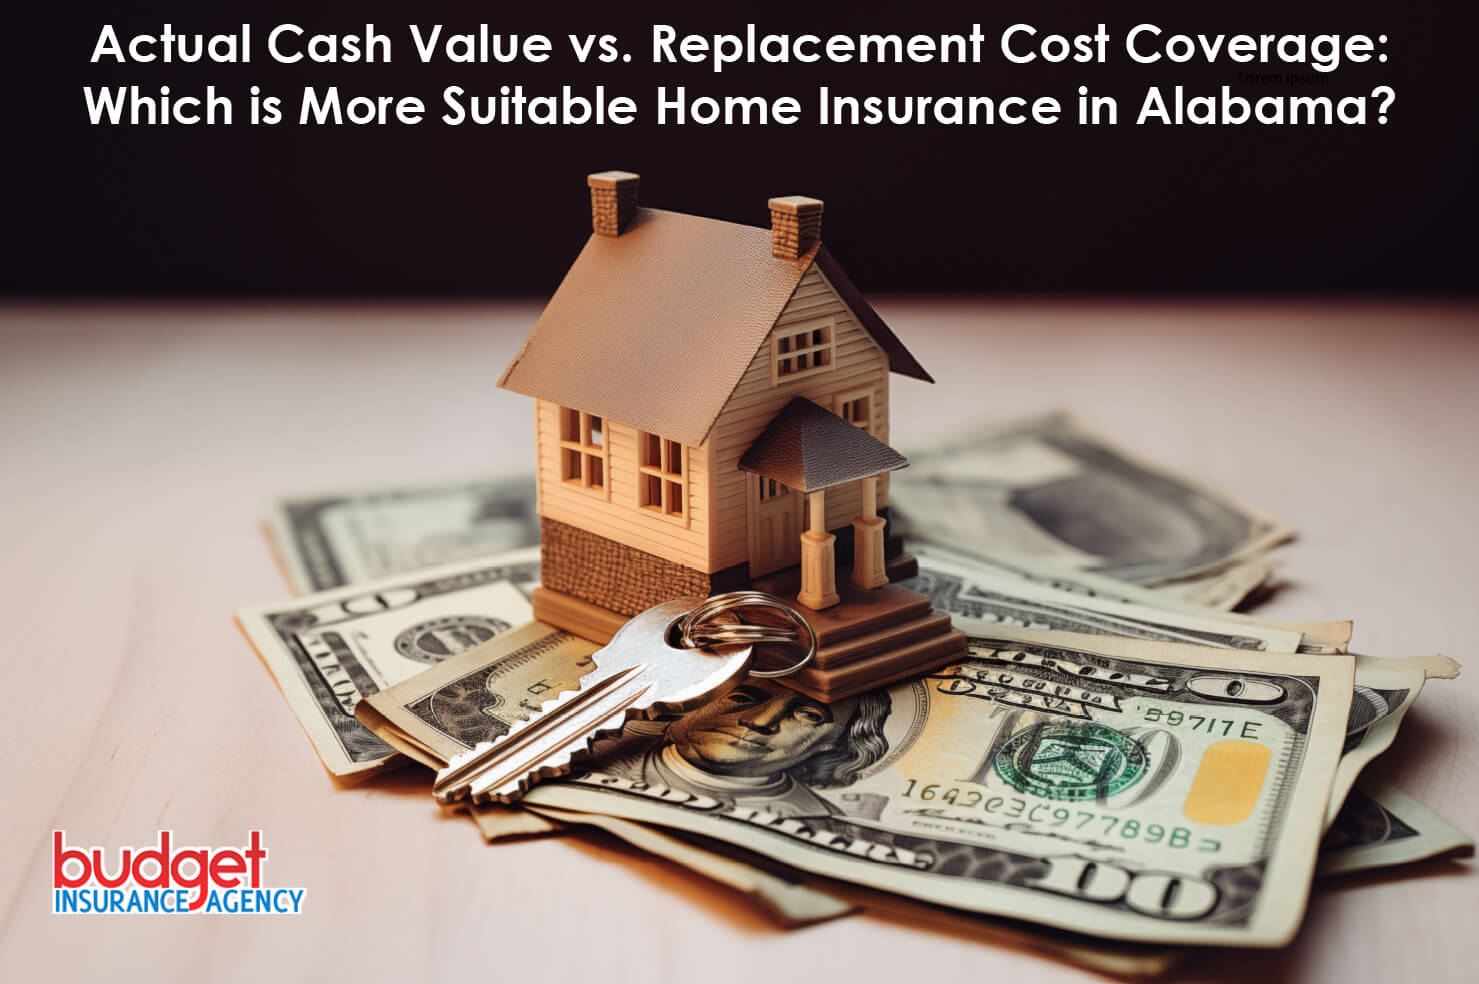 Actual Cash Value vs. Replacement Cost Coverage: Which is More Suitable Home Insurance in Alabama?